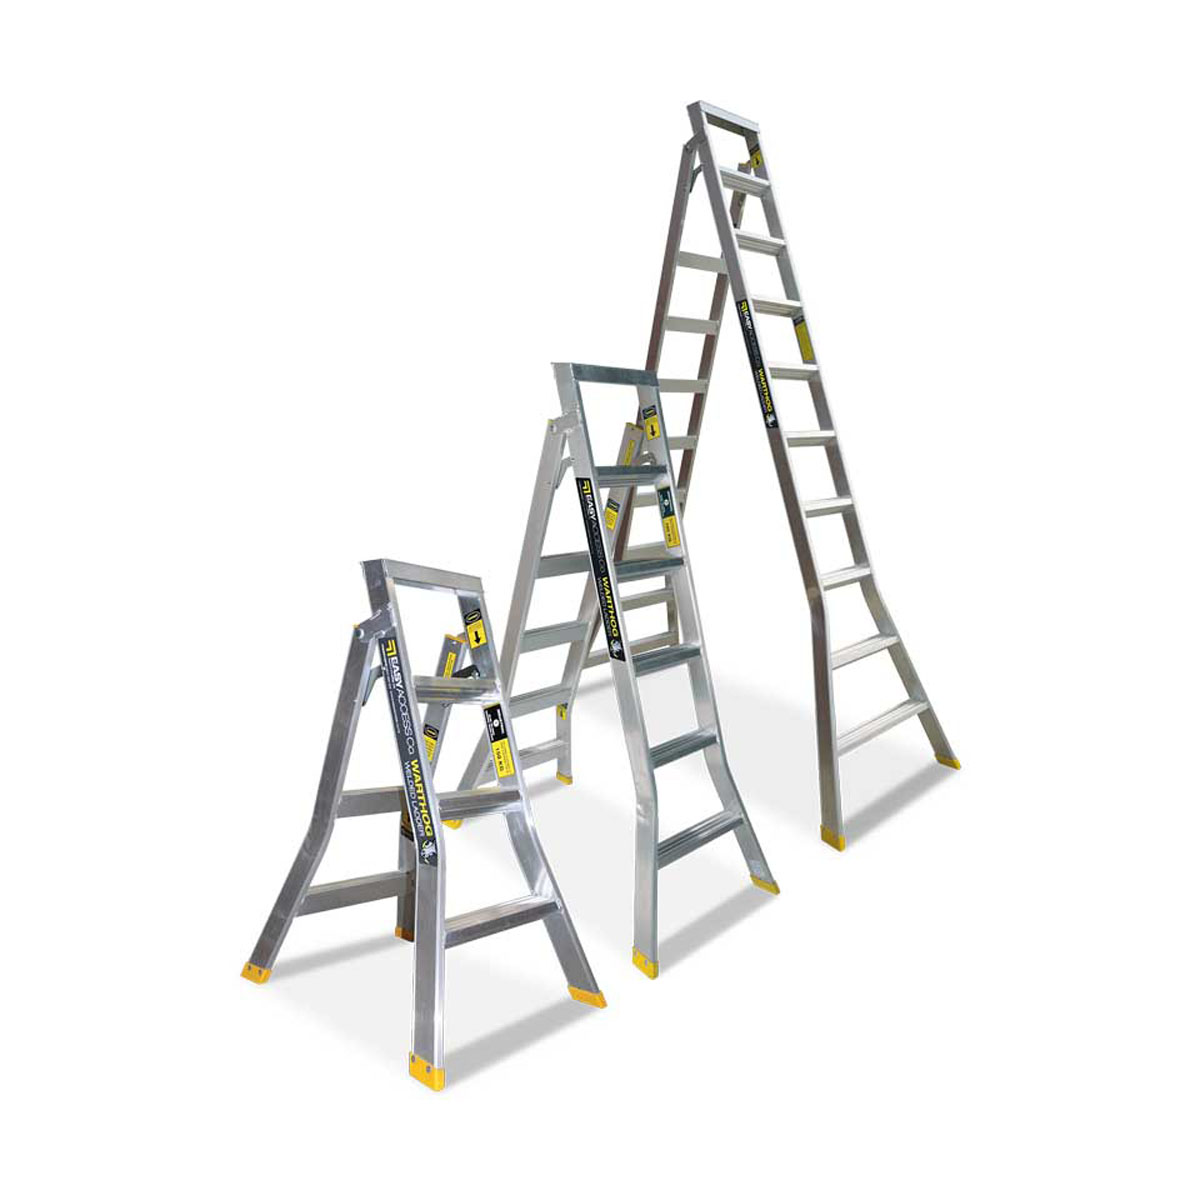 Buy Step-Extension Ladders - Heavy-Duty  in Extension Ladders from Warthog available at Astrolift NZ